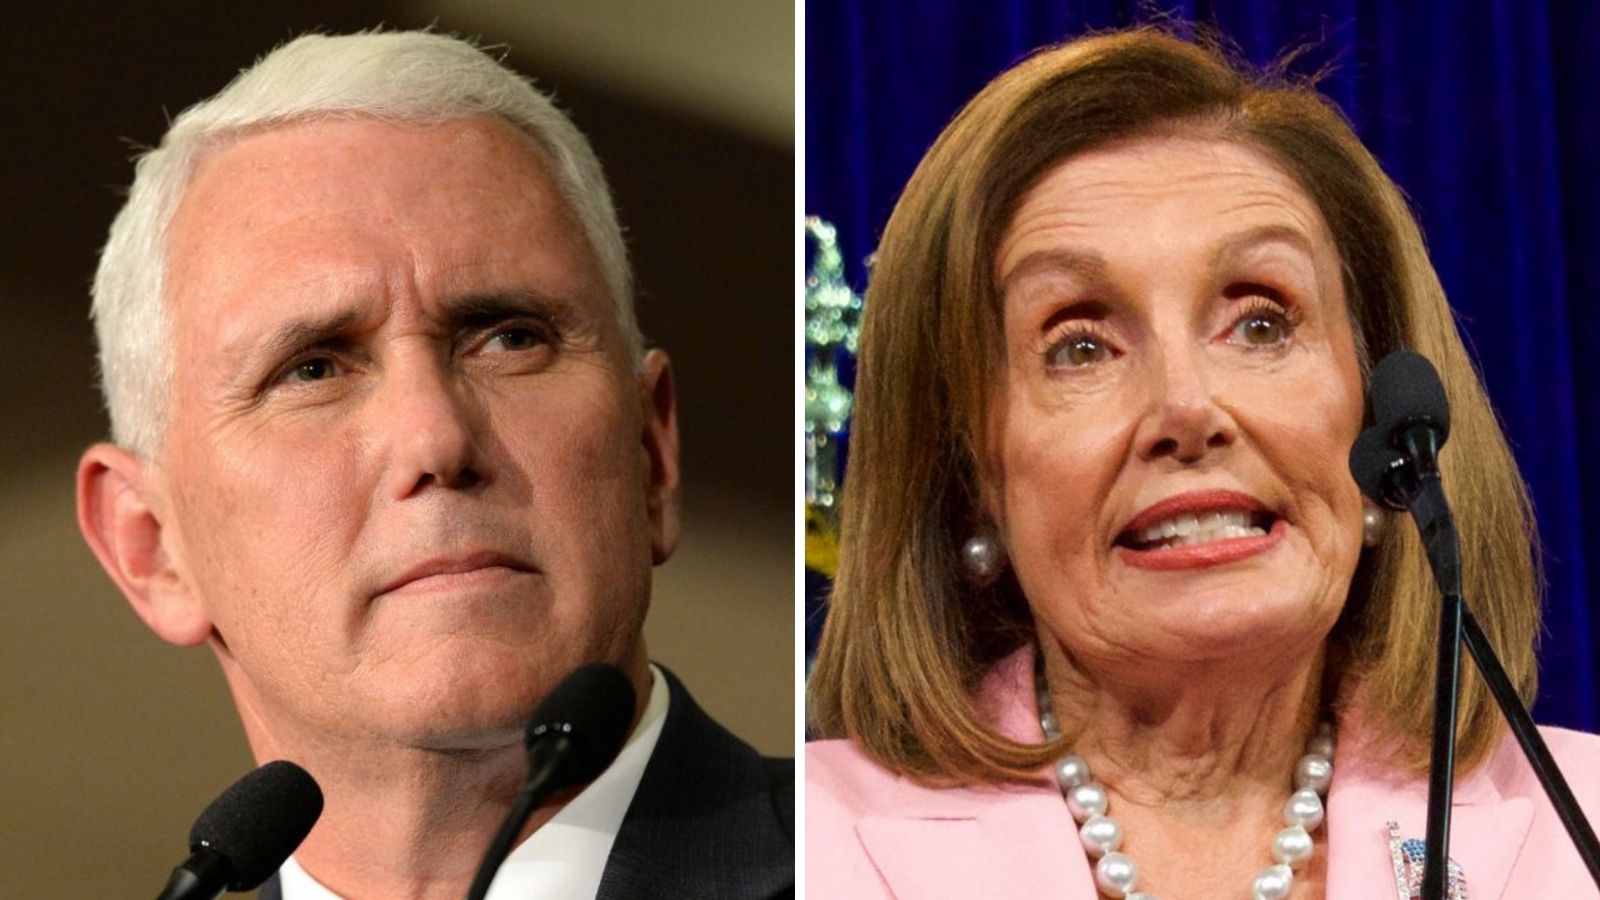 “The Whole Thing Was Staged and Orchestrated”: January 6 Footage Shows Conversation Between Pelosi and Pence During Capitol Breach